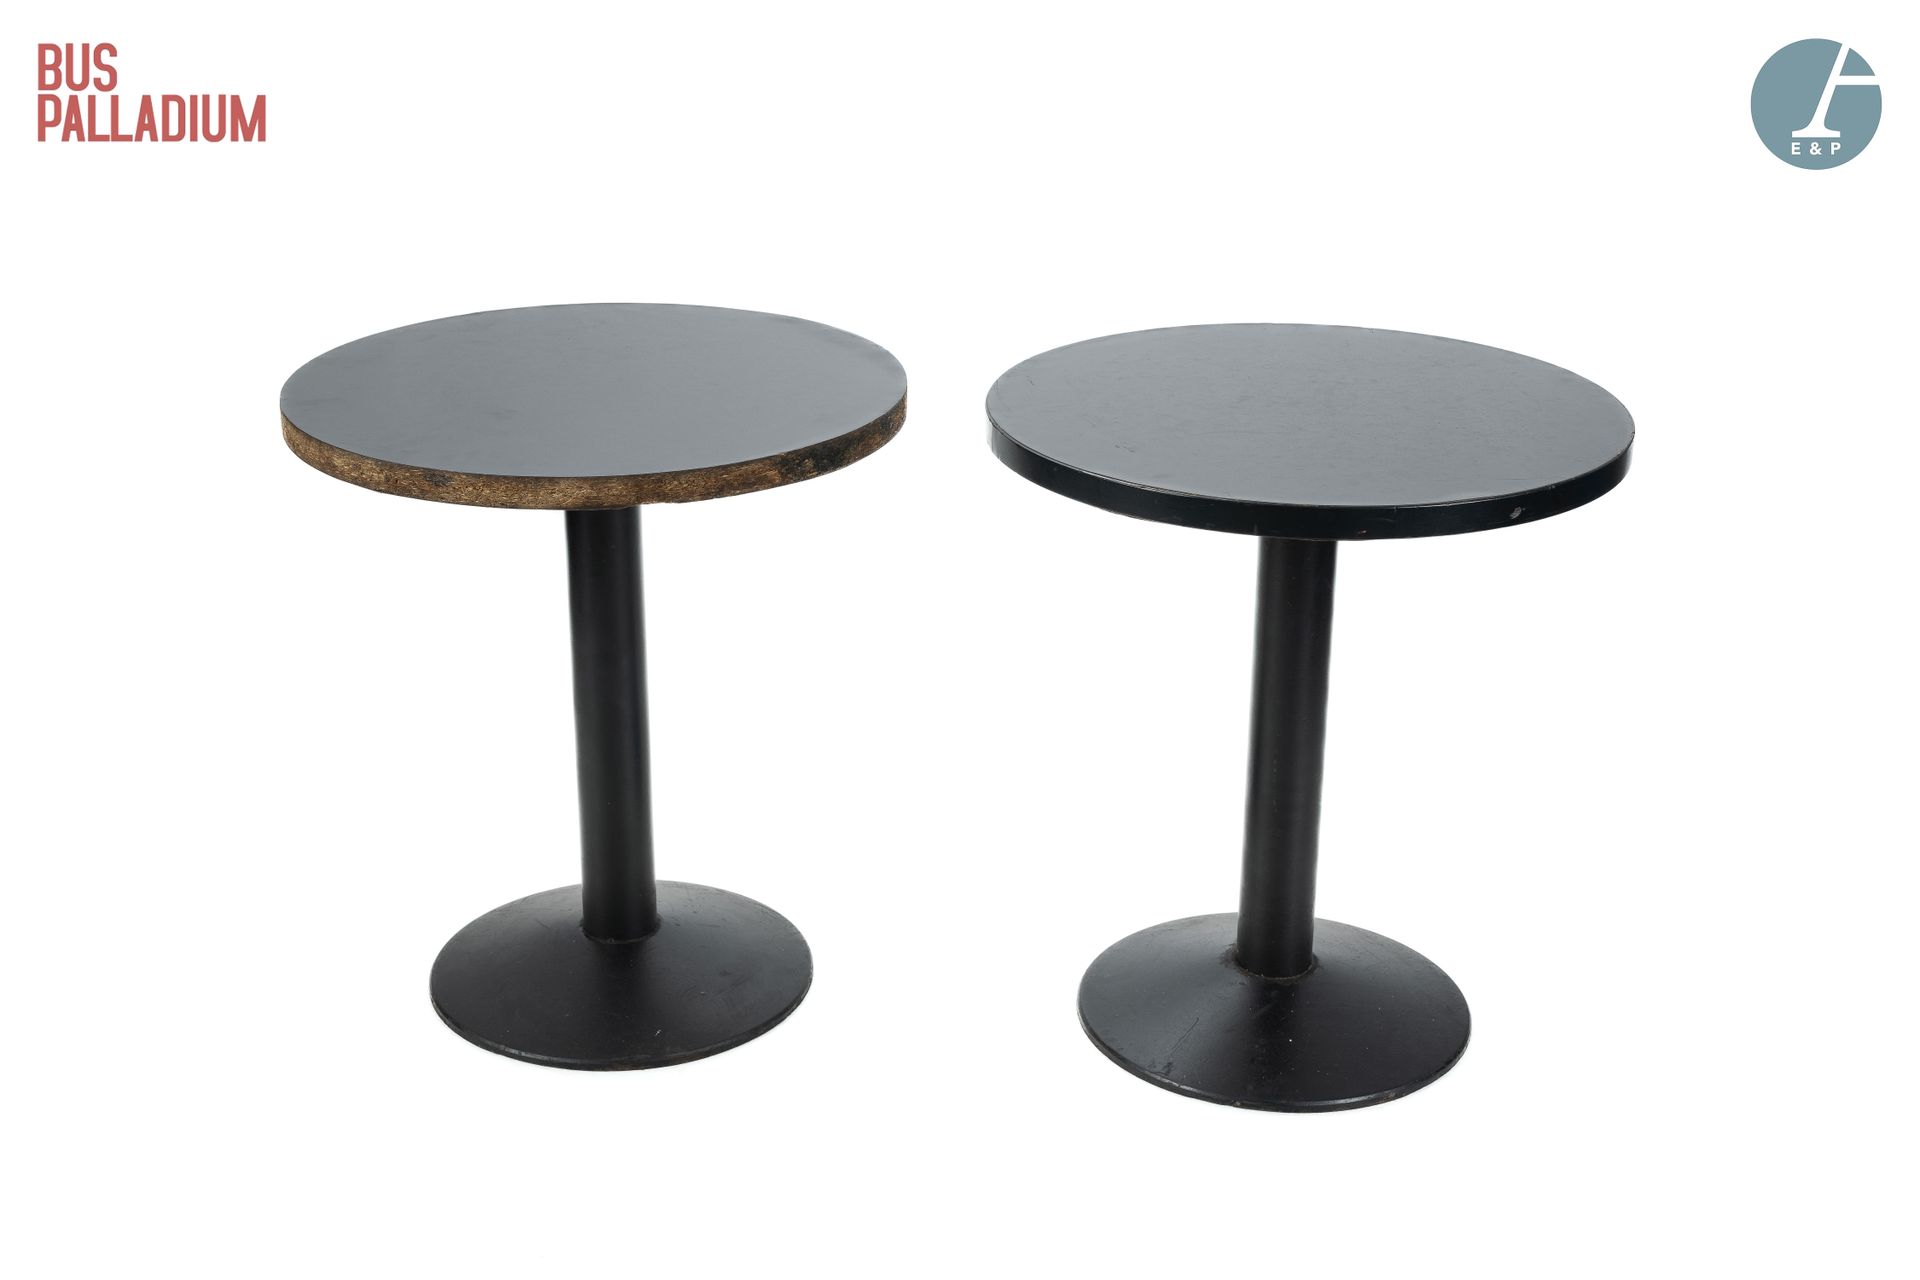 Null From the Palladium Bus

Set of three round tables, black plywood top, cast &hellip;